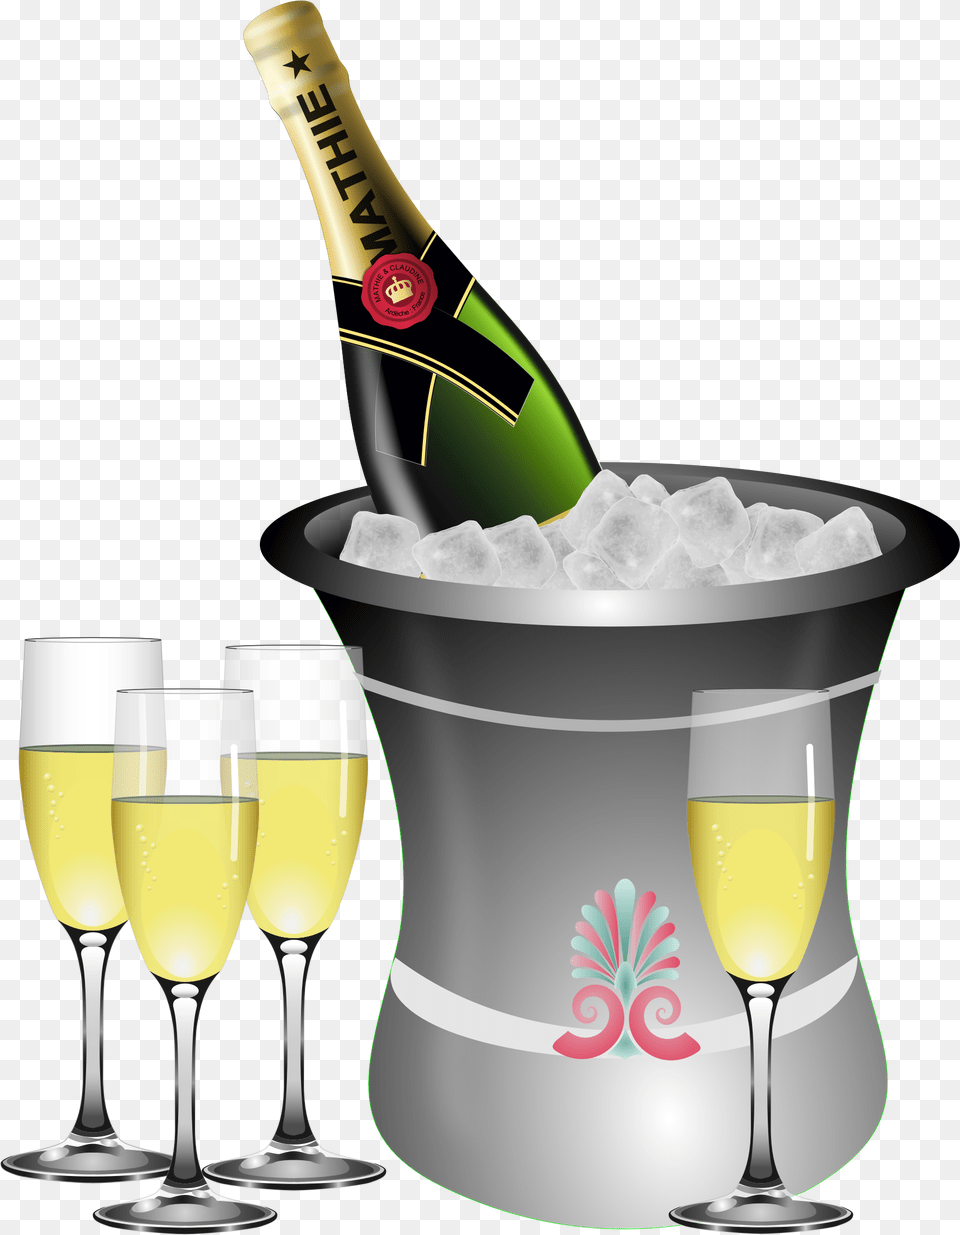 This Free Icons Design Of Champagne On Ice Remix, Glass, Alcohol, Beverage, Beer Png Image